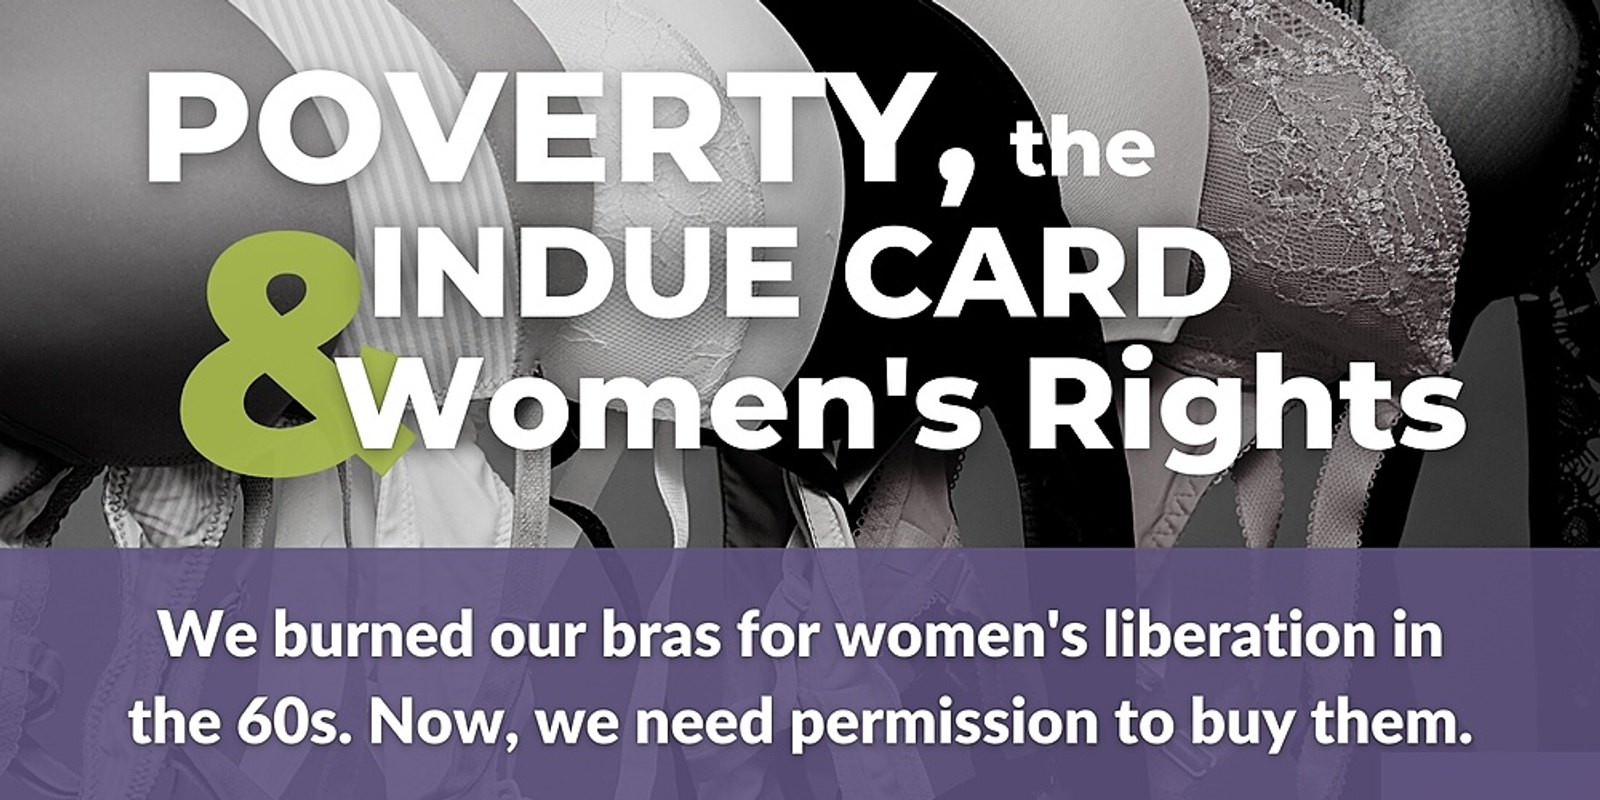 Poverty, the Indue Card & Women's Rights